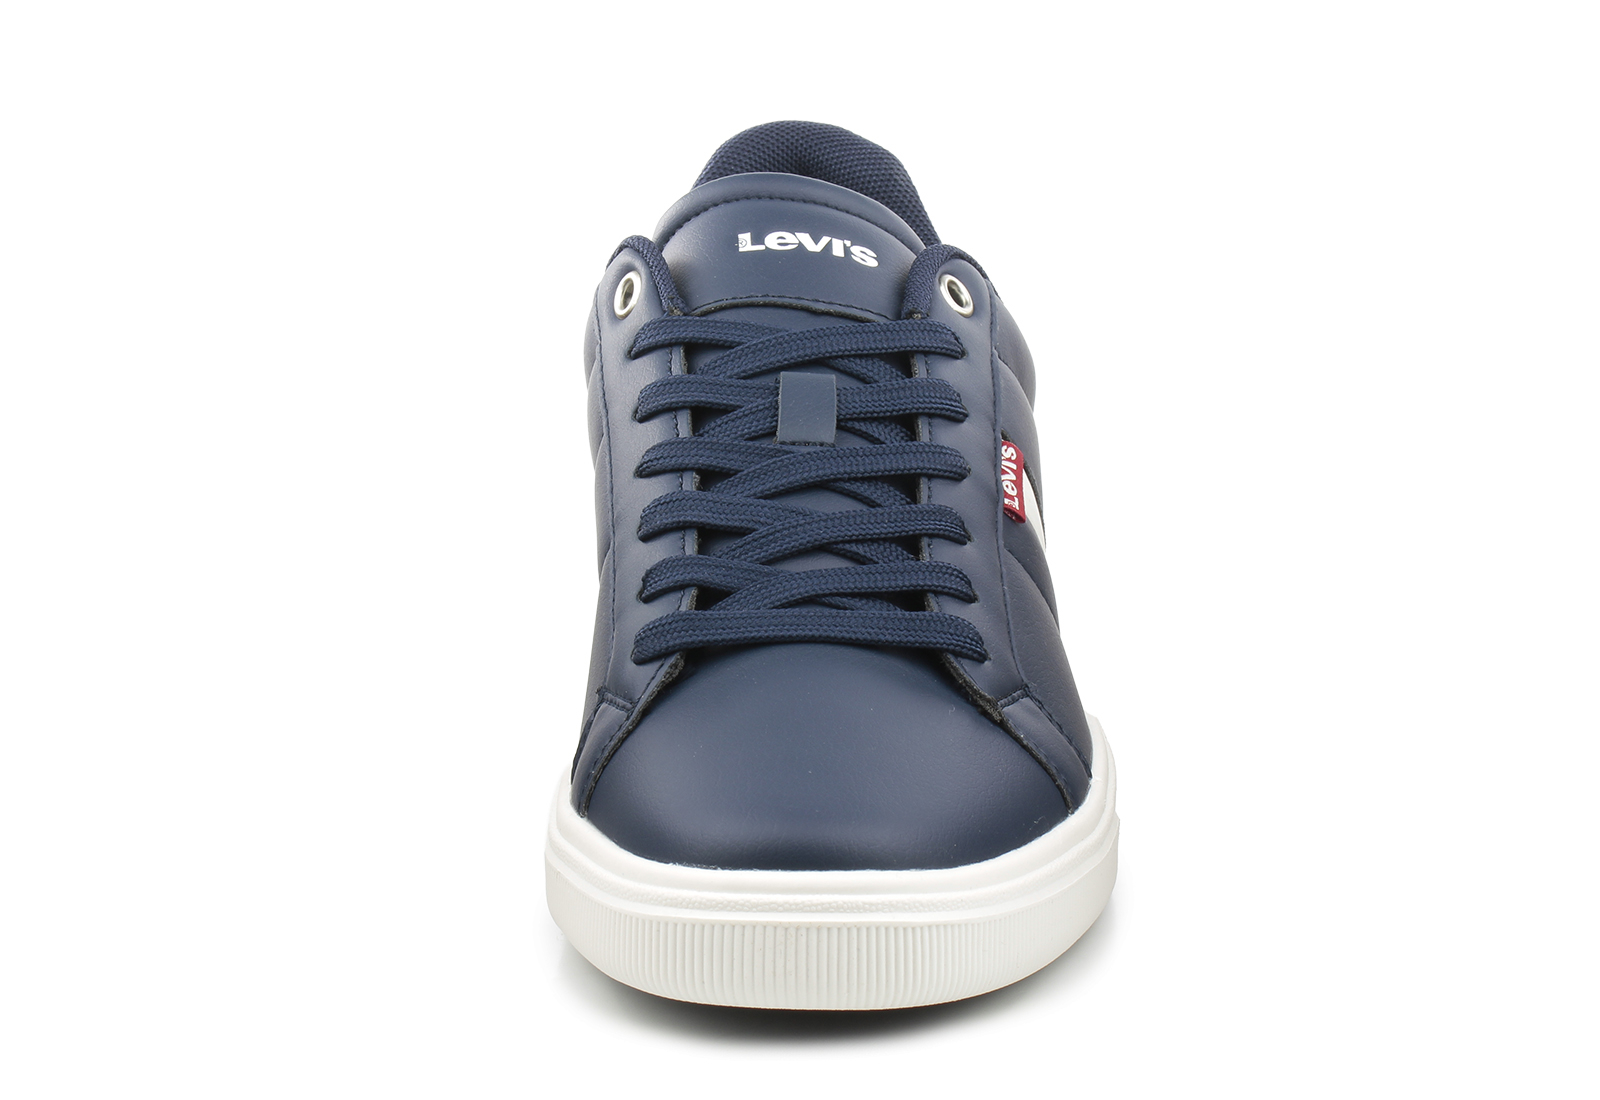 Levis Trainers - Archie - 235431-794-17 - Online shop for sneakers, shoes  and boots